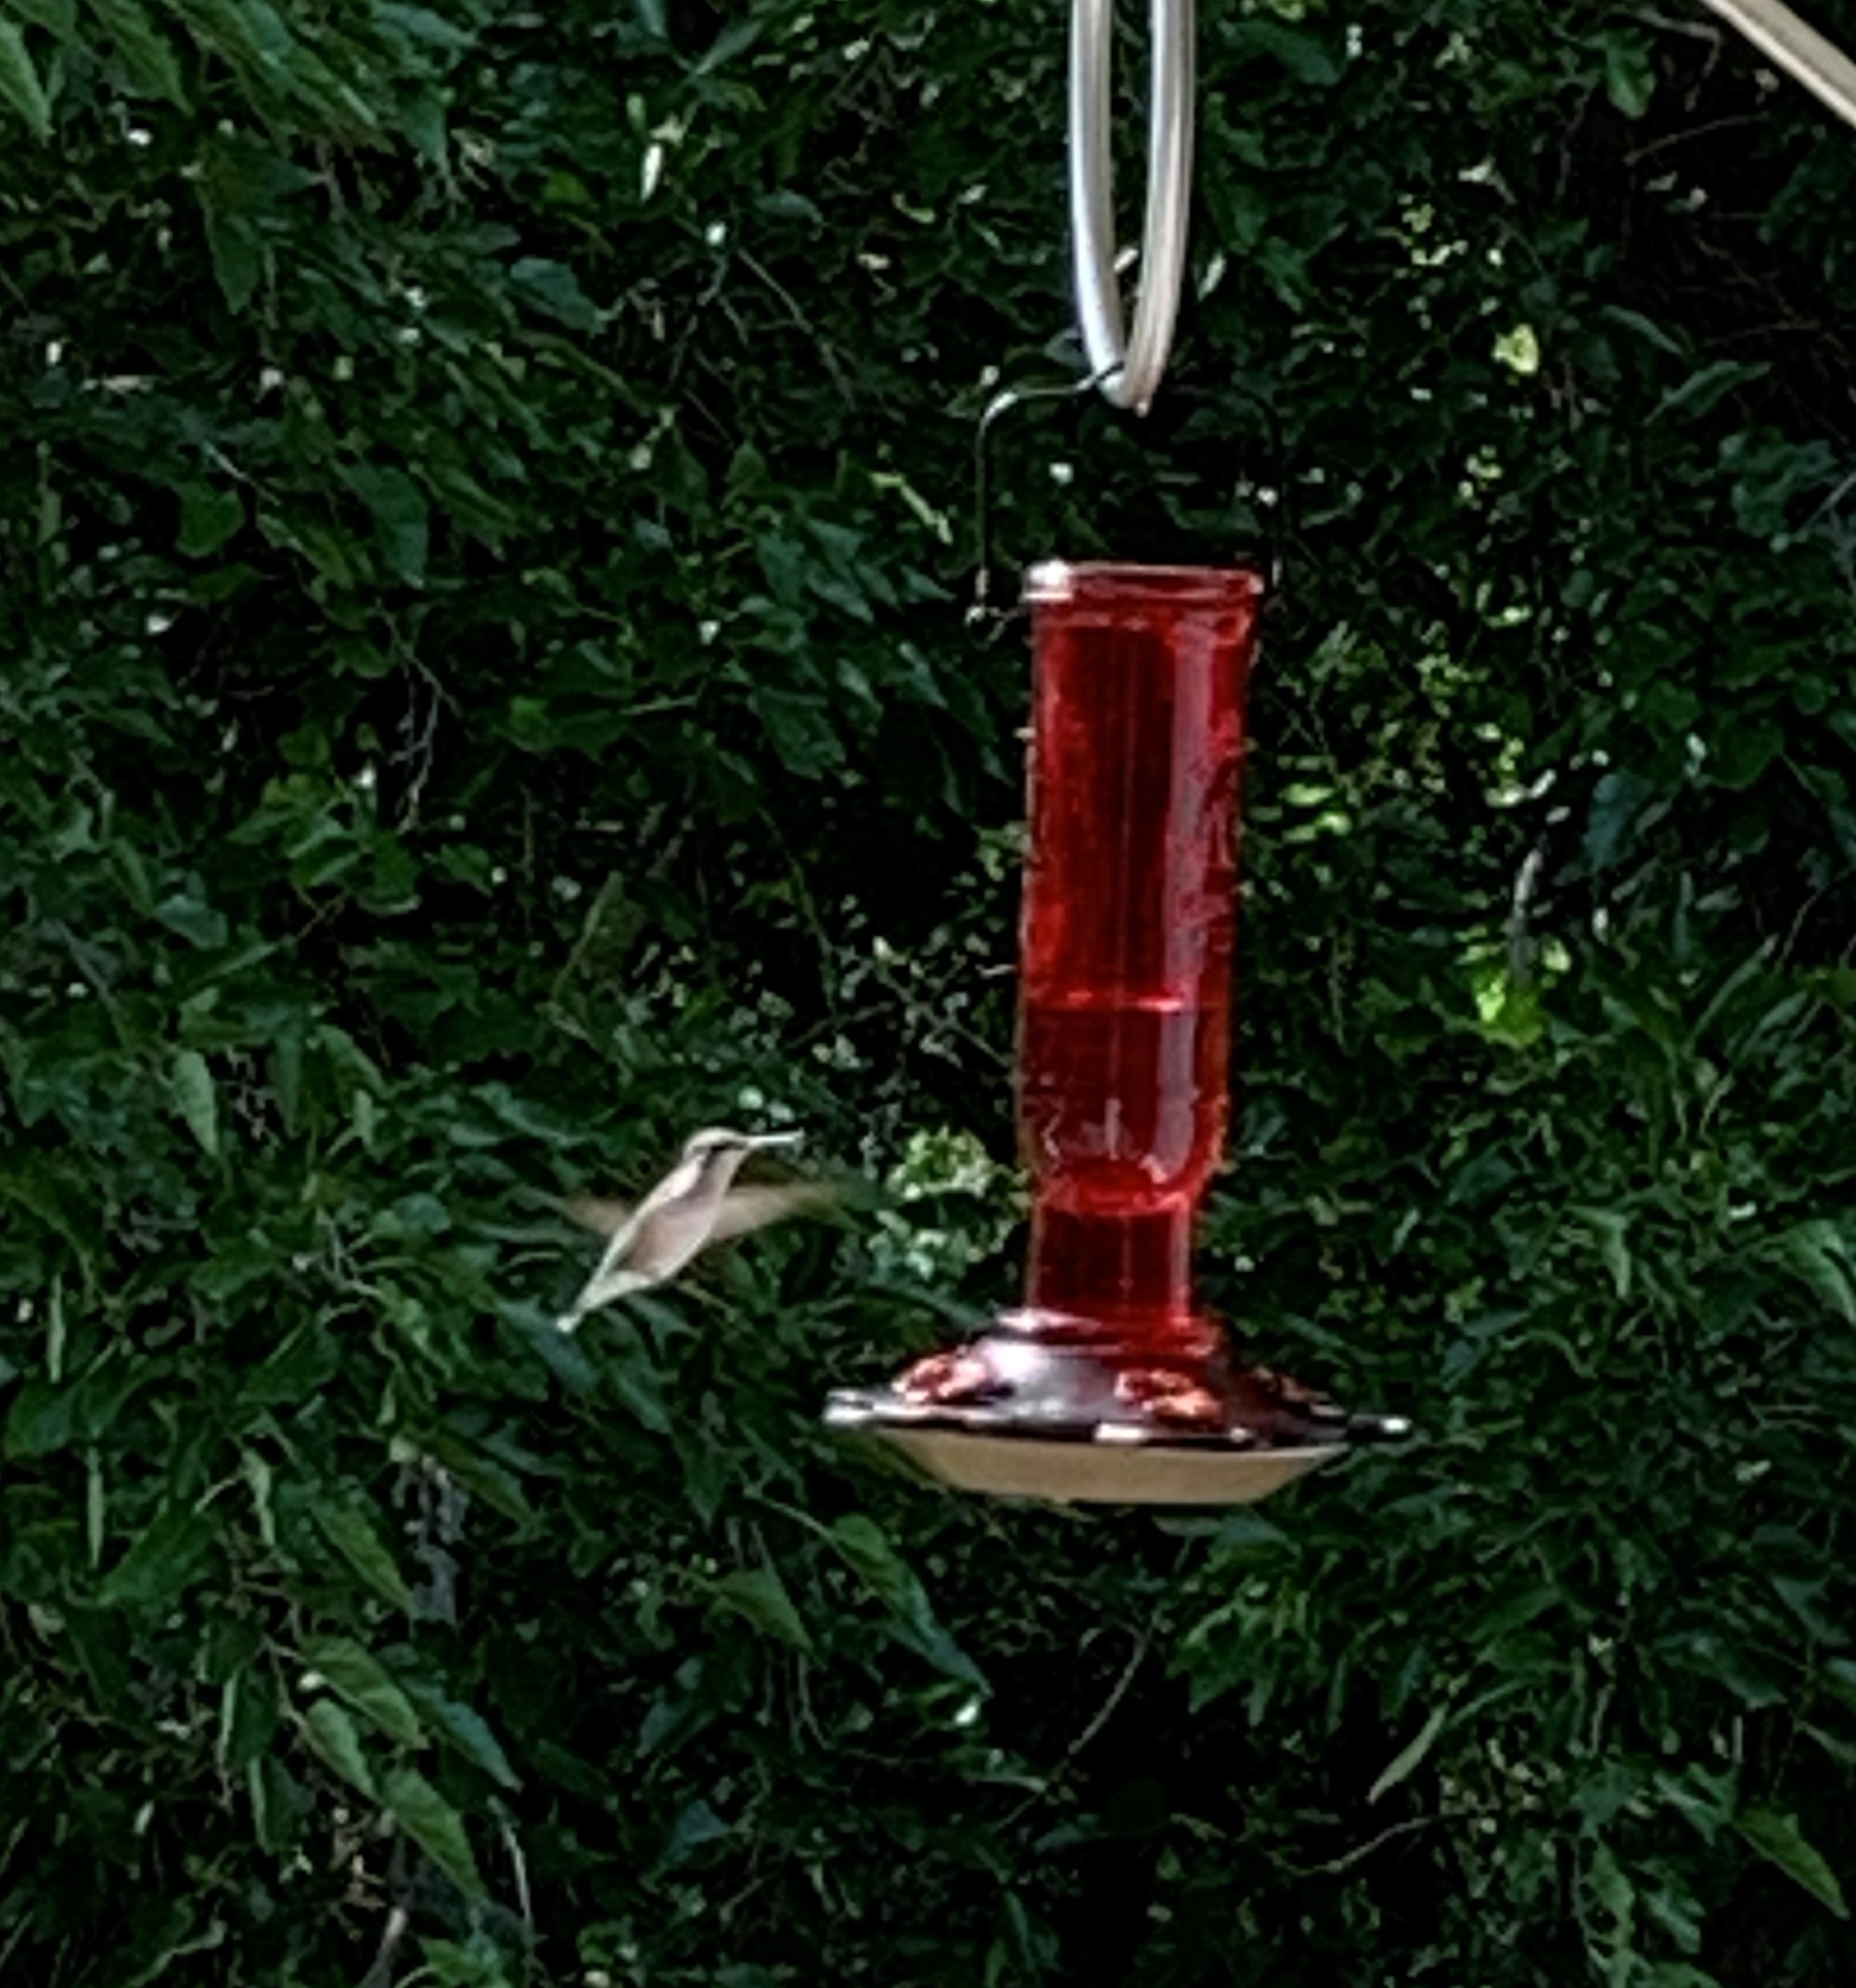 An iridescent green hummingbird flies away from the hummingbird feeder. The feeder looks like an upside down red medicine bottle with five little red flowers around the base.